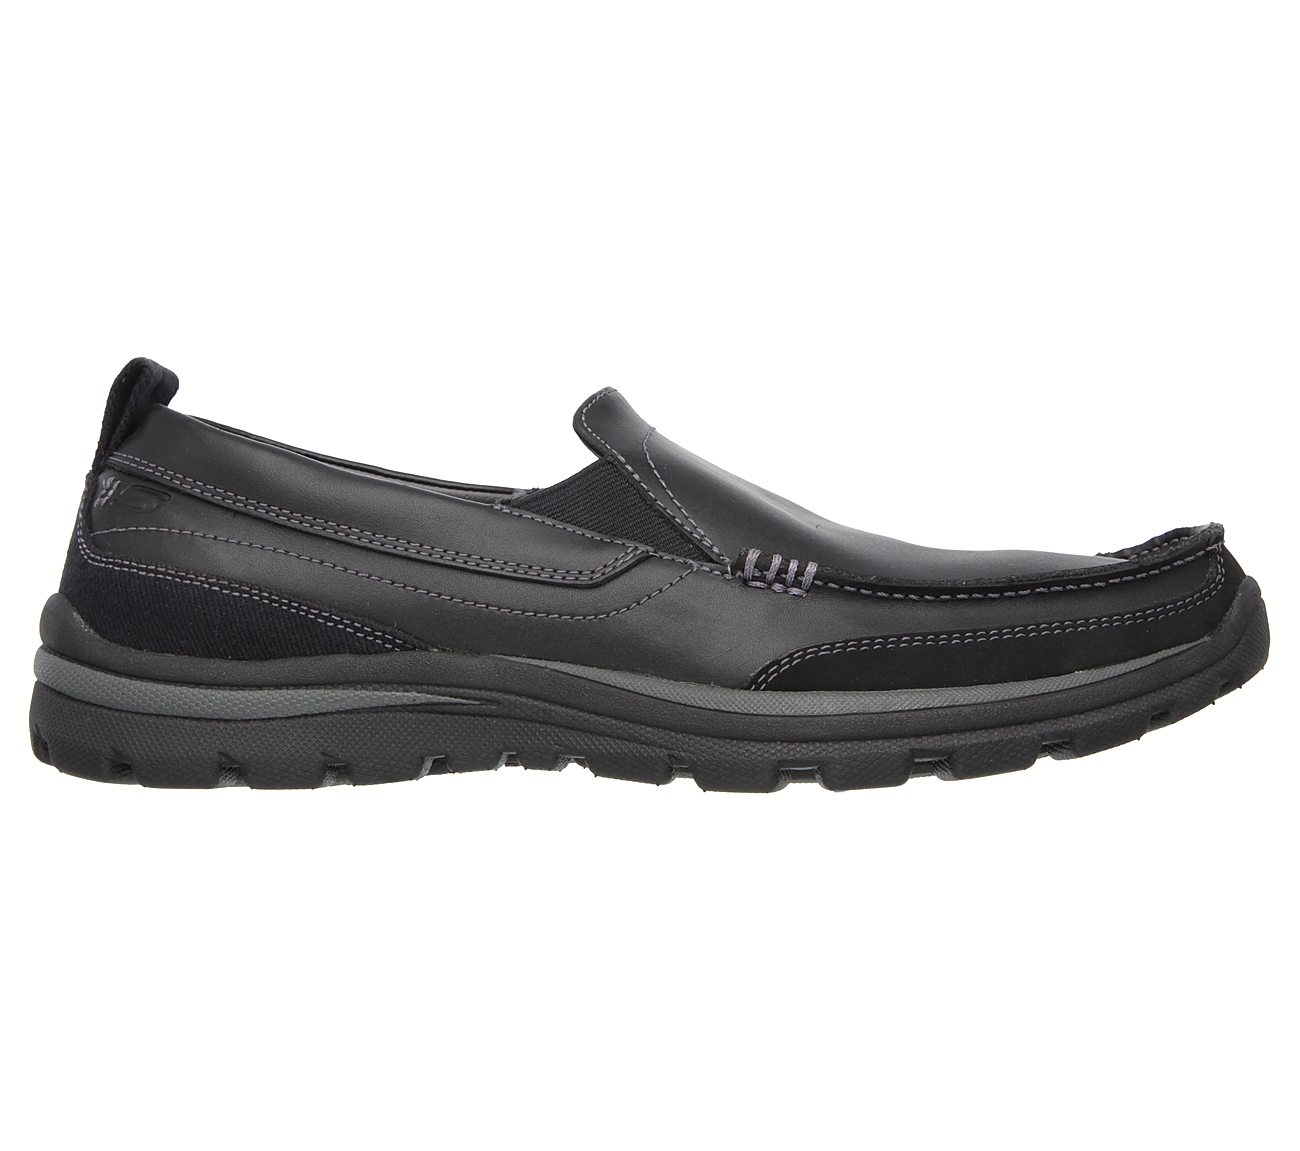 skechers outlet coupon